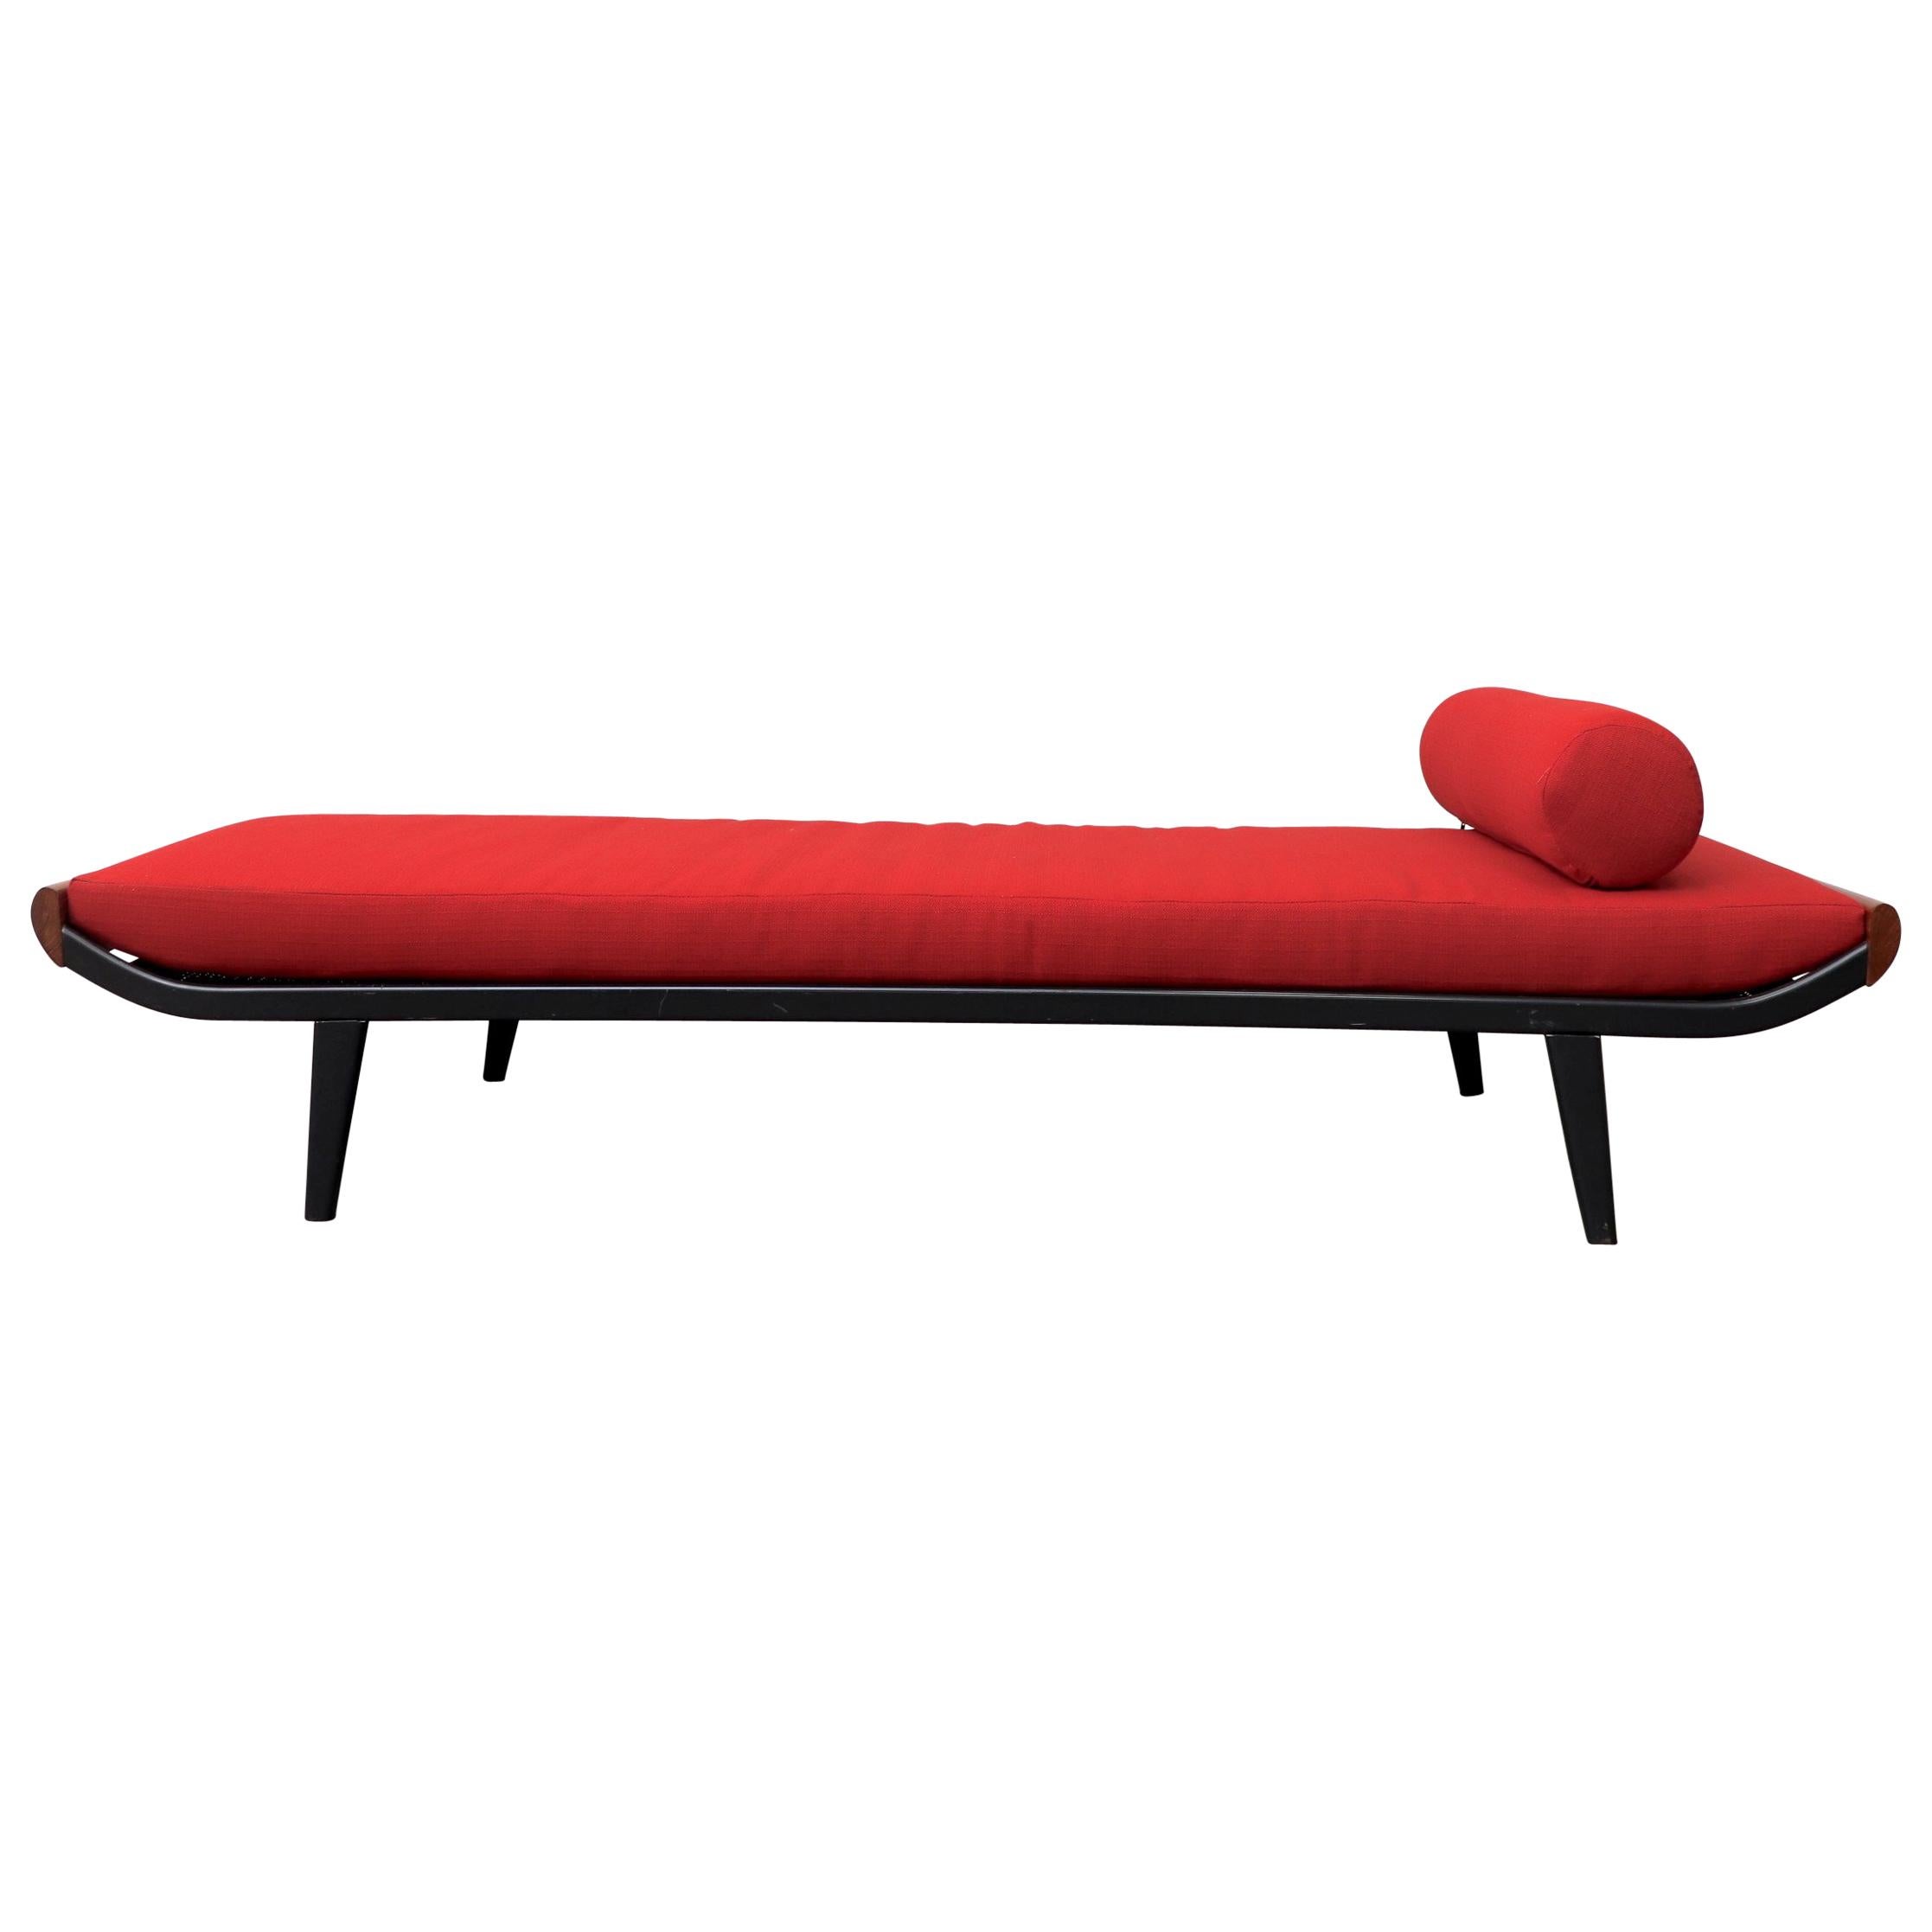 A.R. Cordemeyer "Cleopatra" Day Bed for Auping